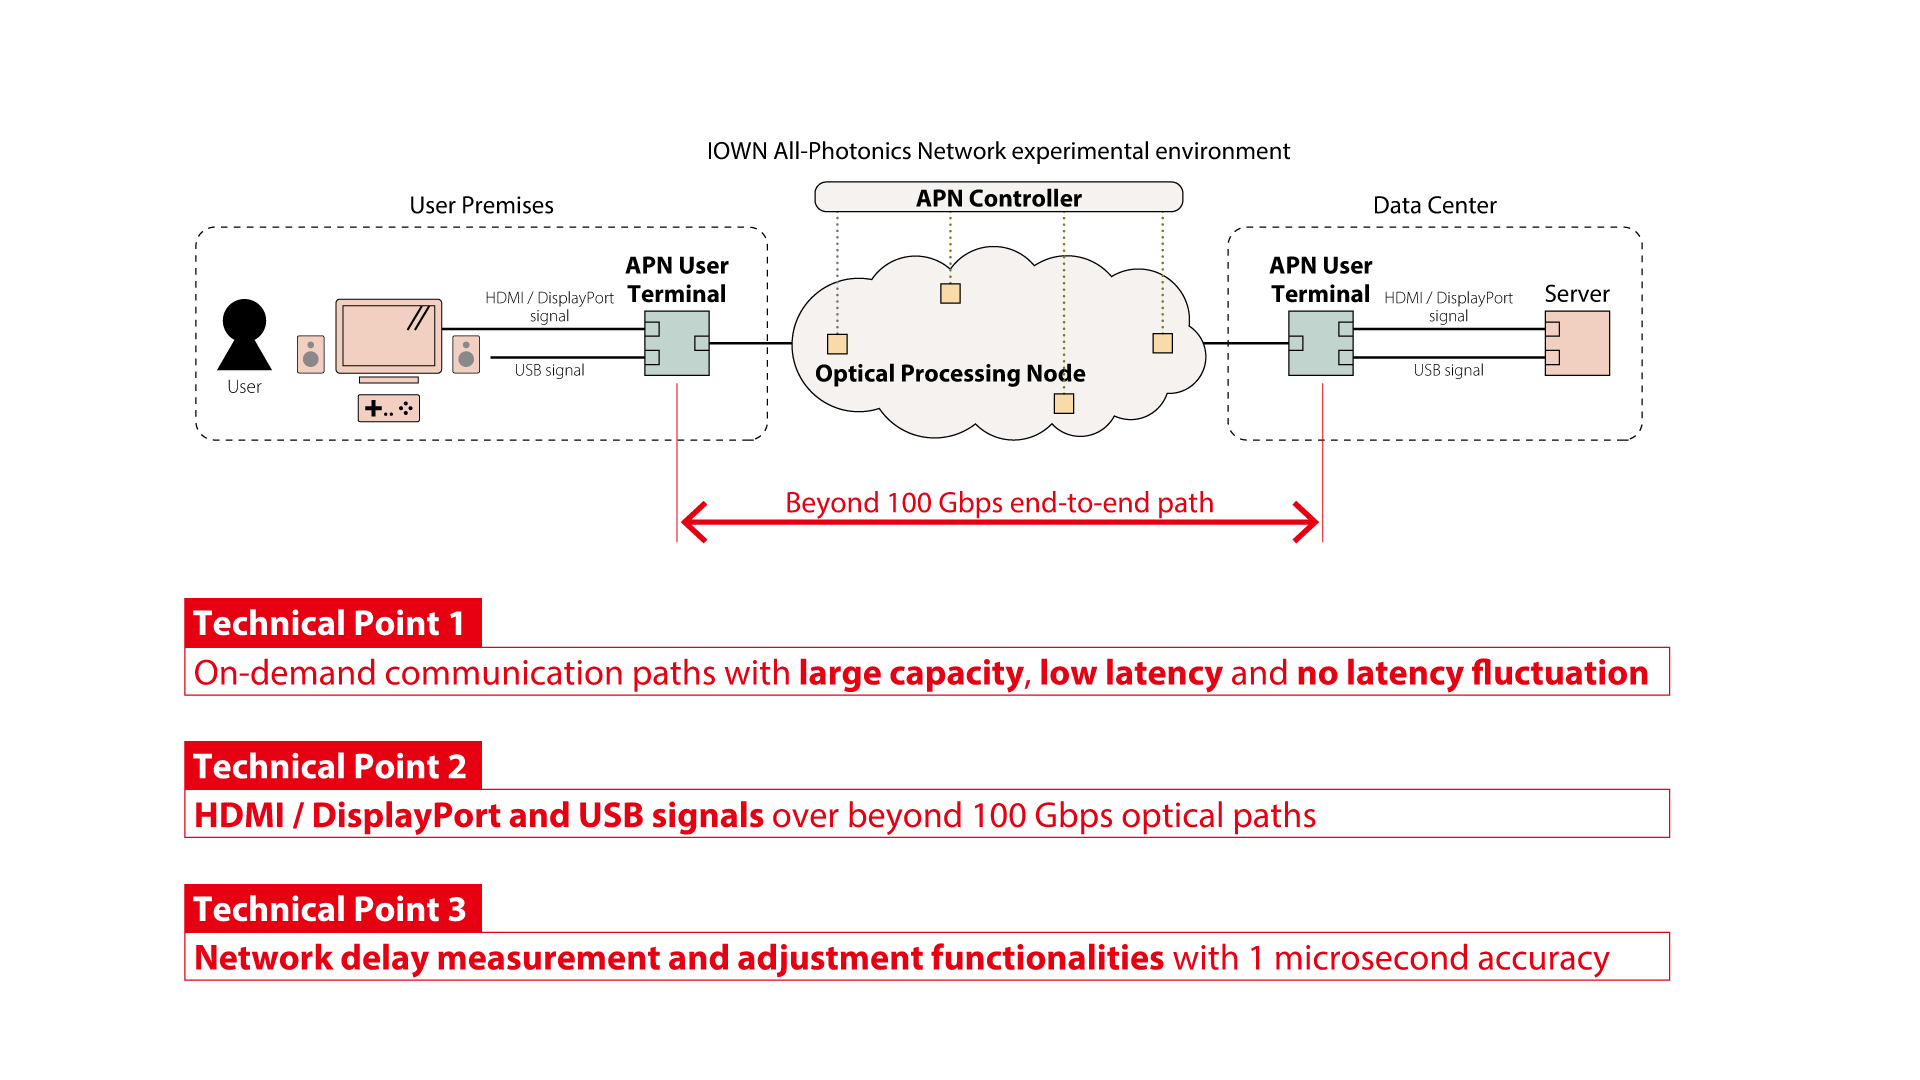 Figure 2:  IOWN All-Photonics Network and APN User Terminal provide beyond 100 Gbps paths to users